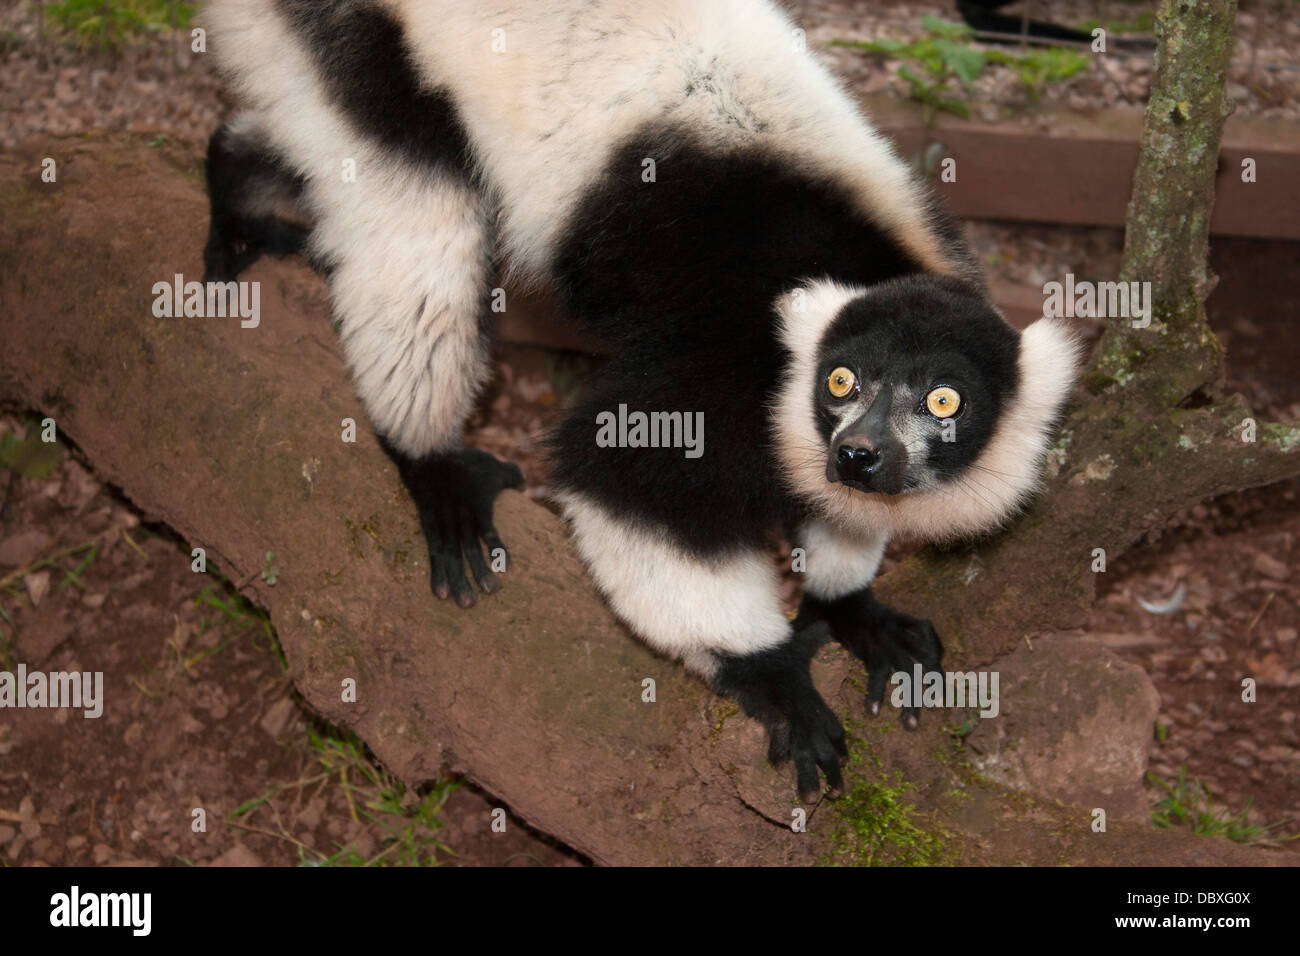 Belted black and white ruffed lemur looking shocked Stock Photo